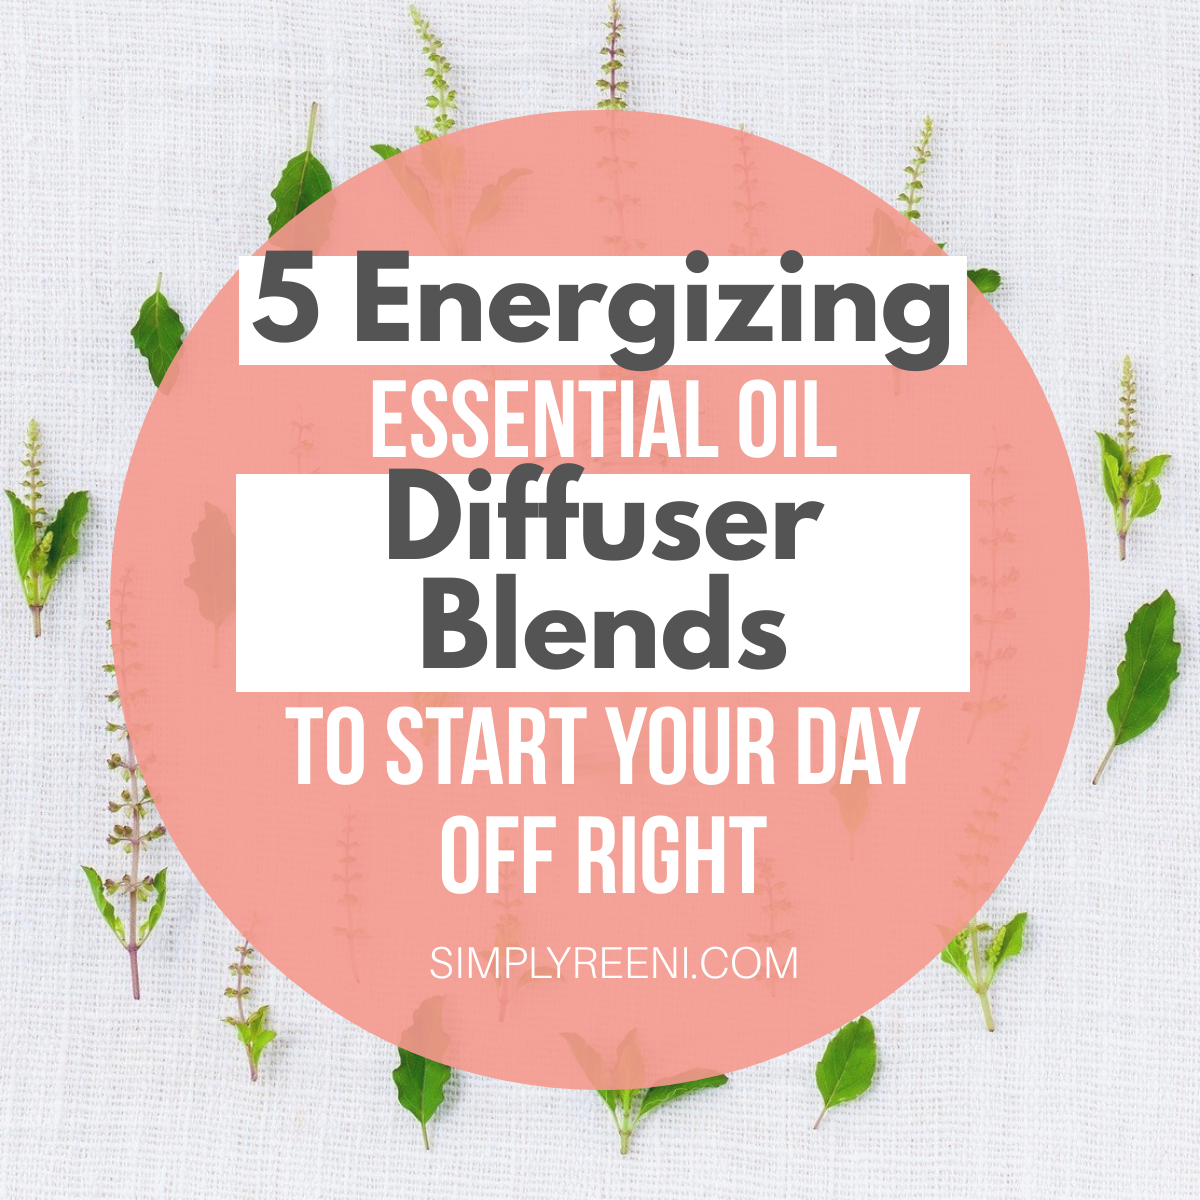 5 Energizing Essential Oil Diffuser Blends to Start Your Day Off Right